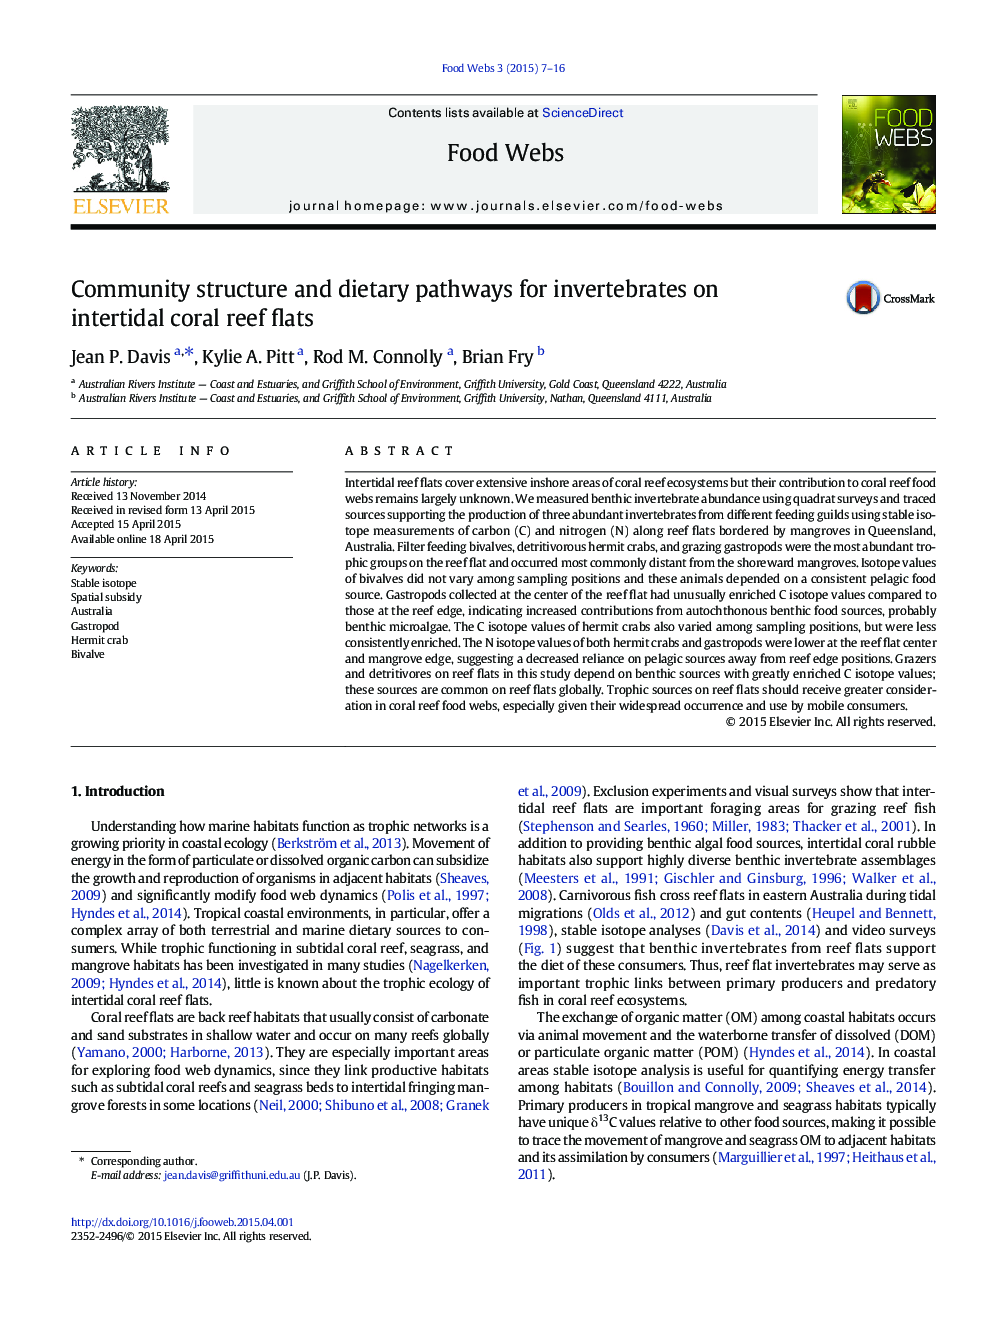 Community structure and dietary pathways for invertebrates on intertidal coral reef flats